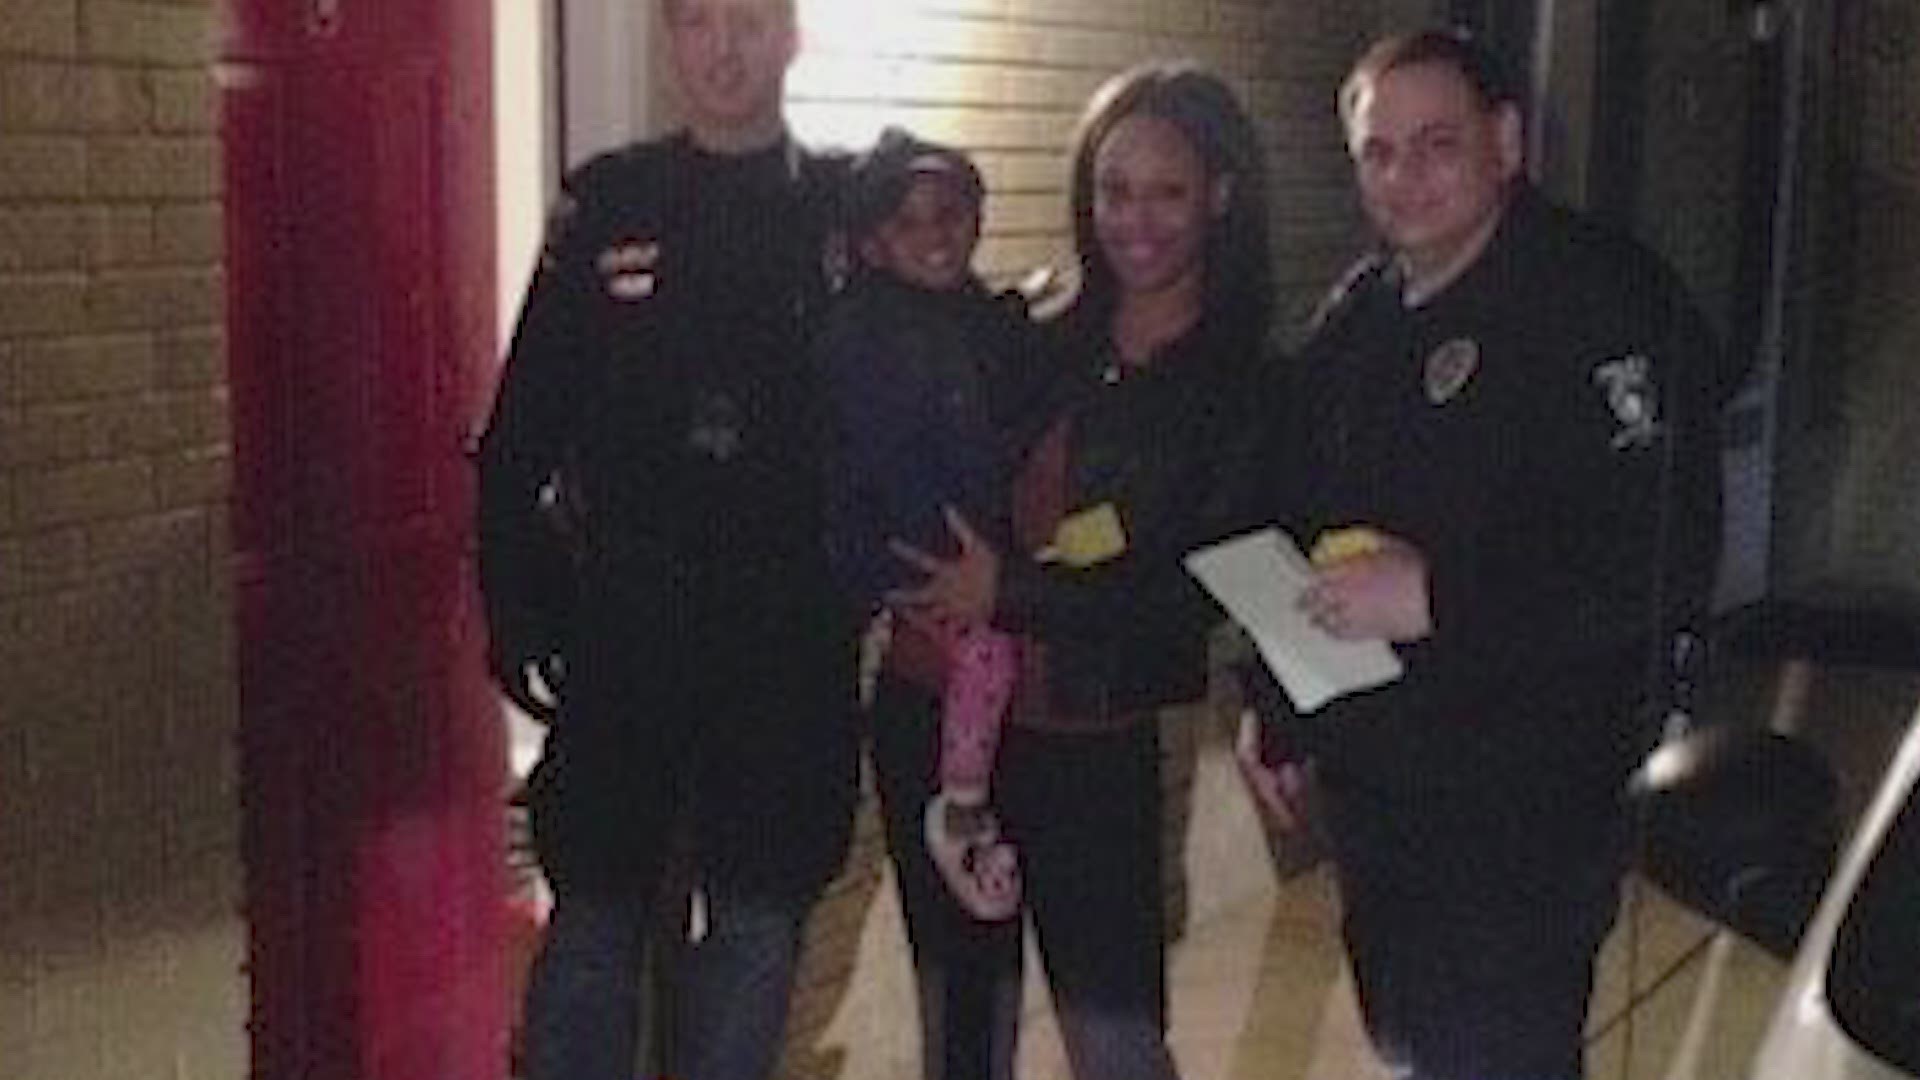 This single mom was constantly being harassed. CMPD officers went above and beyond to make her feel safe again